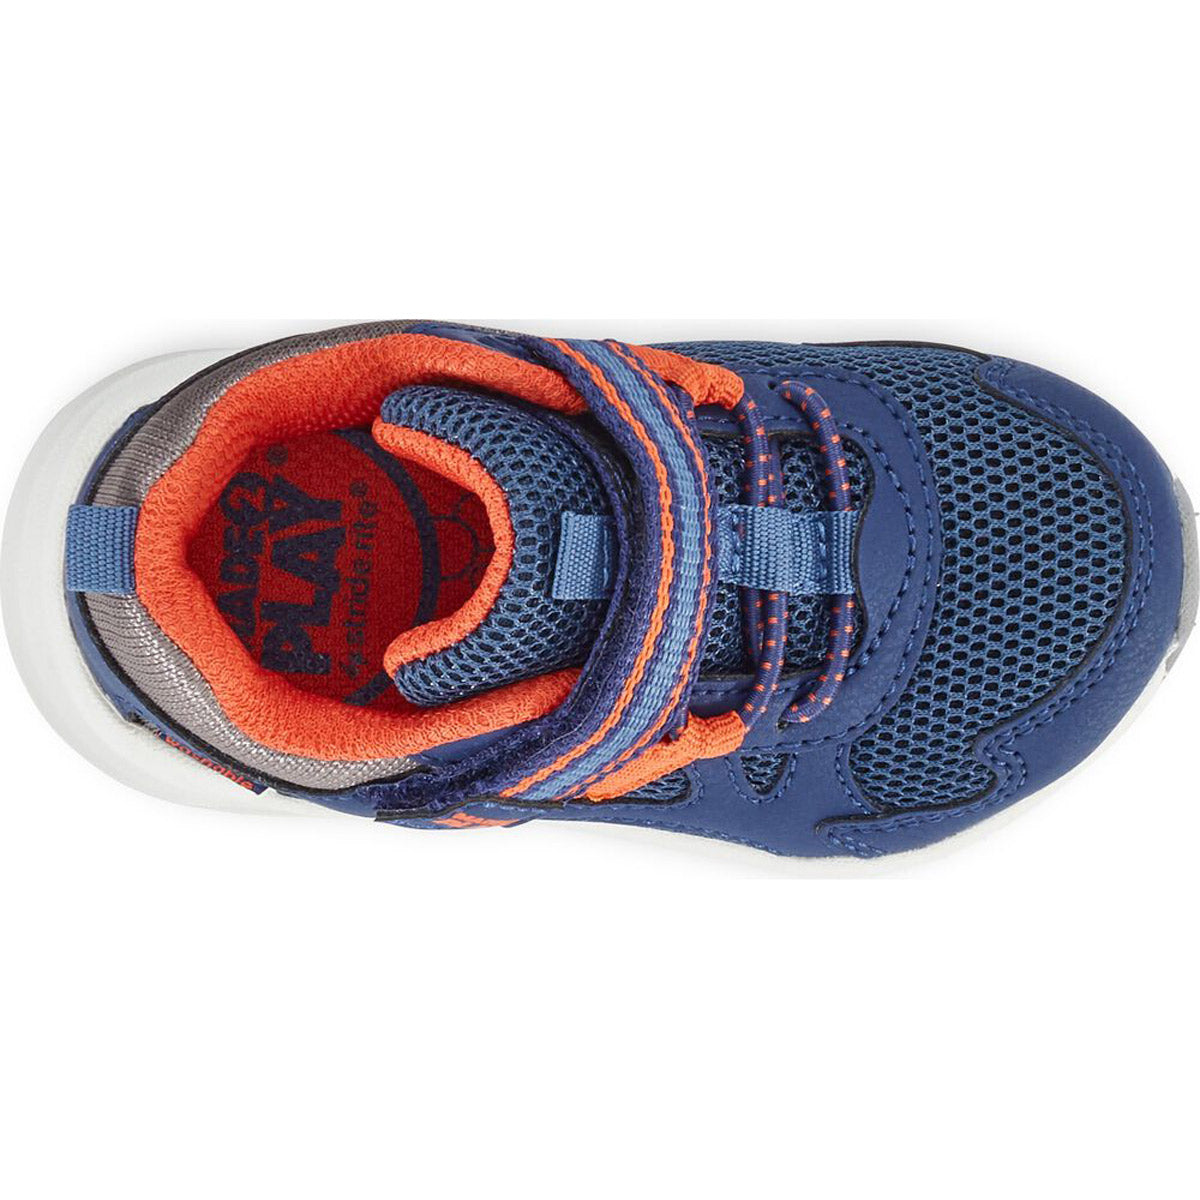 STRIDE RITE M2P PLAYER NAVY MULTI - TODDLERS